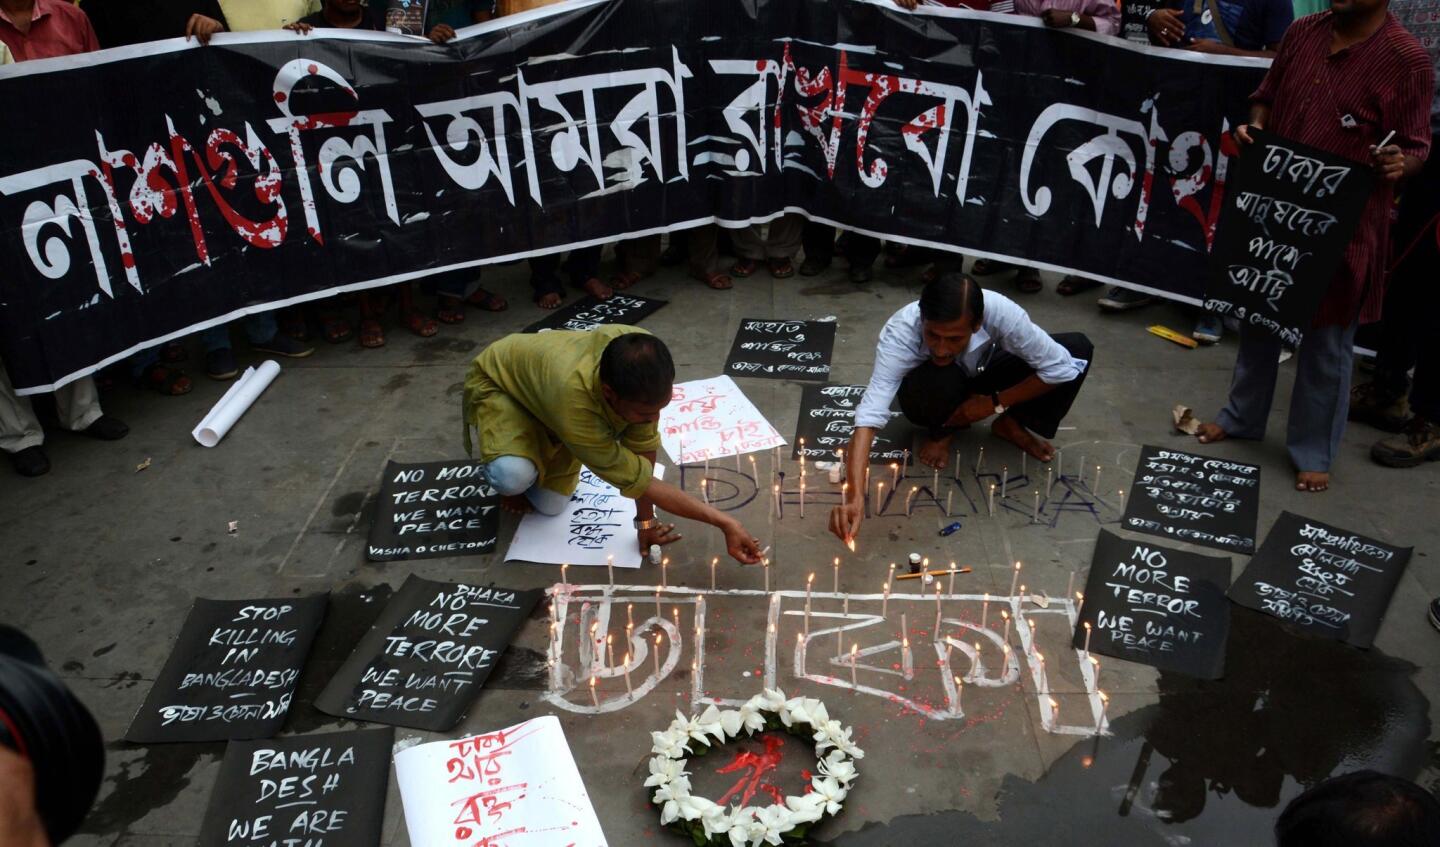 Indian activists in Kolkata light candles in memory of victims of the terror attack in Dhaka, Bangladesh.